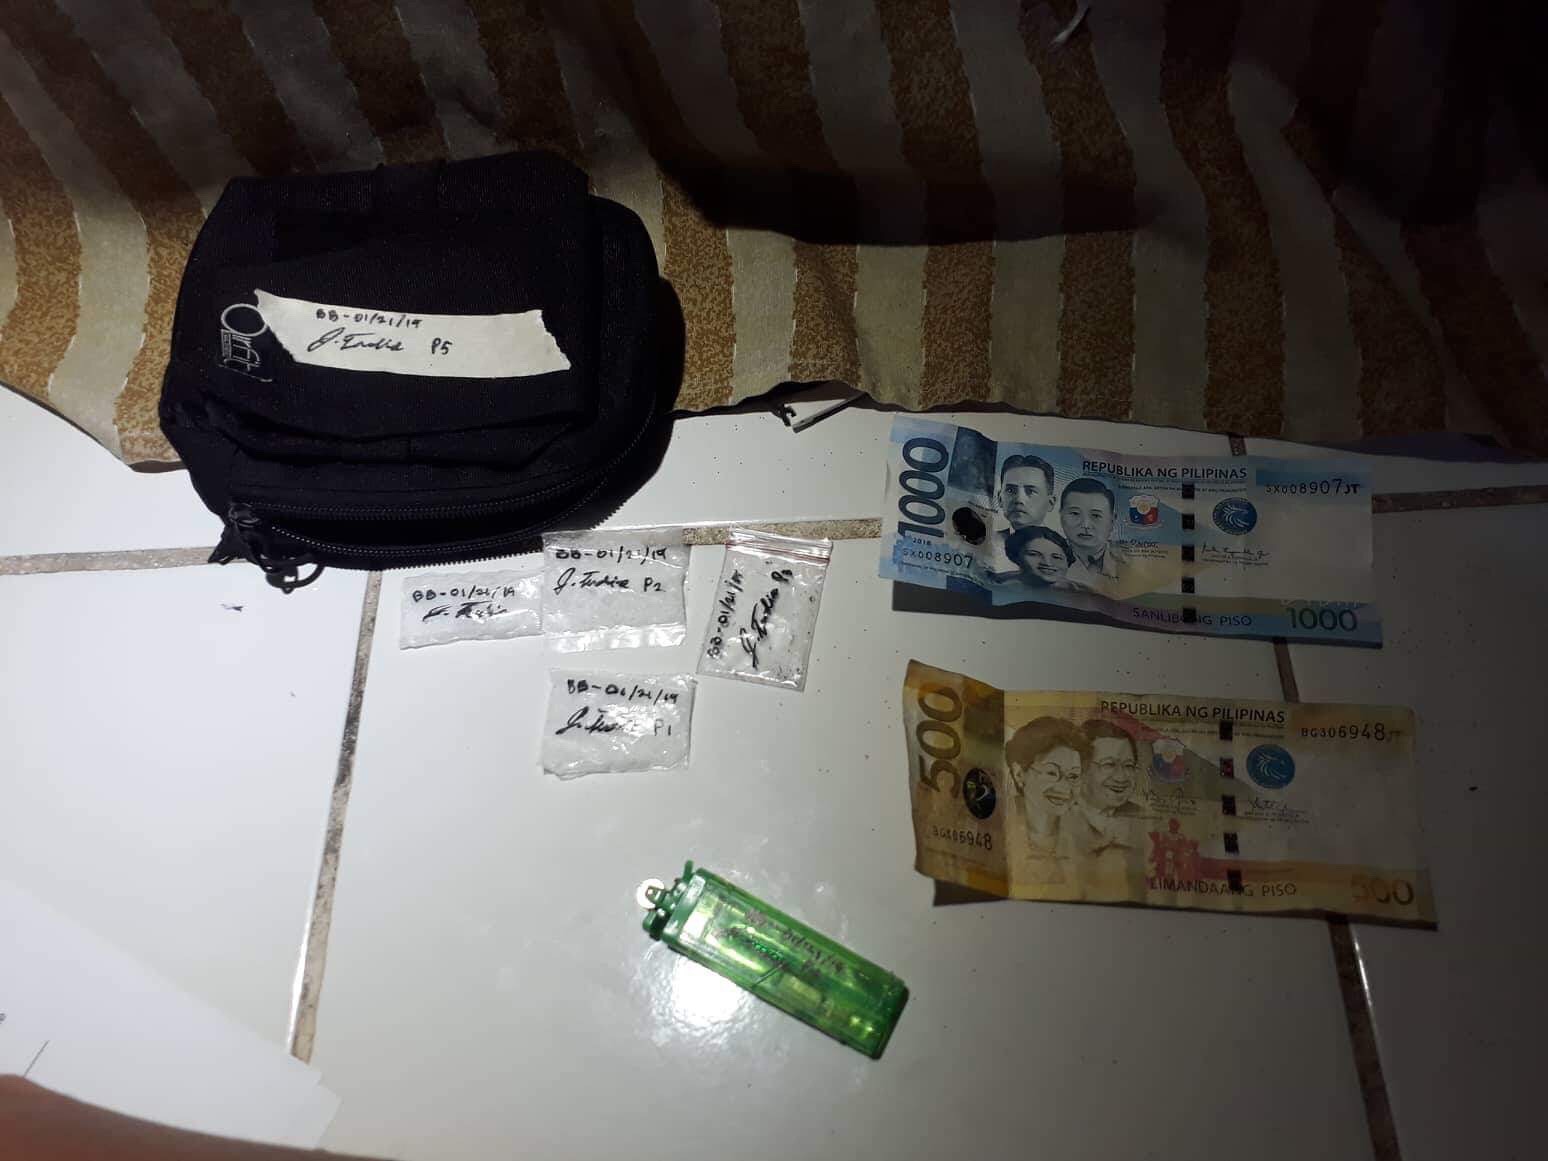  Shabu worth more than P400,000 seized in Tacloban City buy-busts